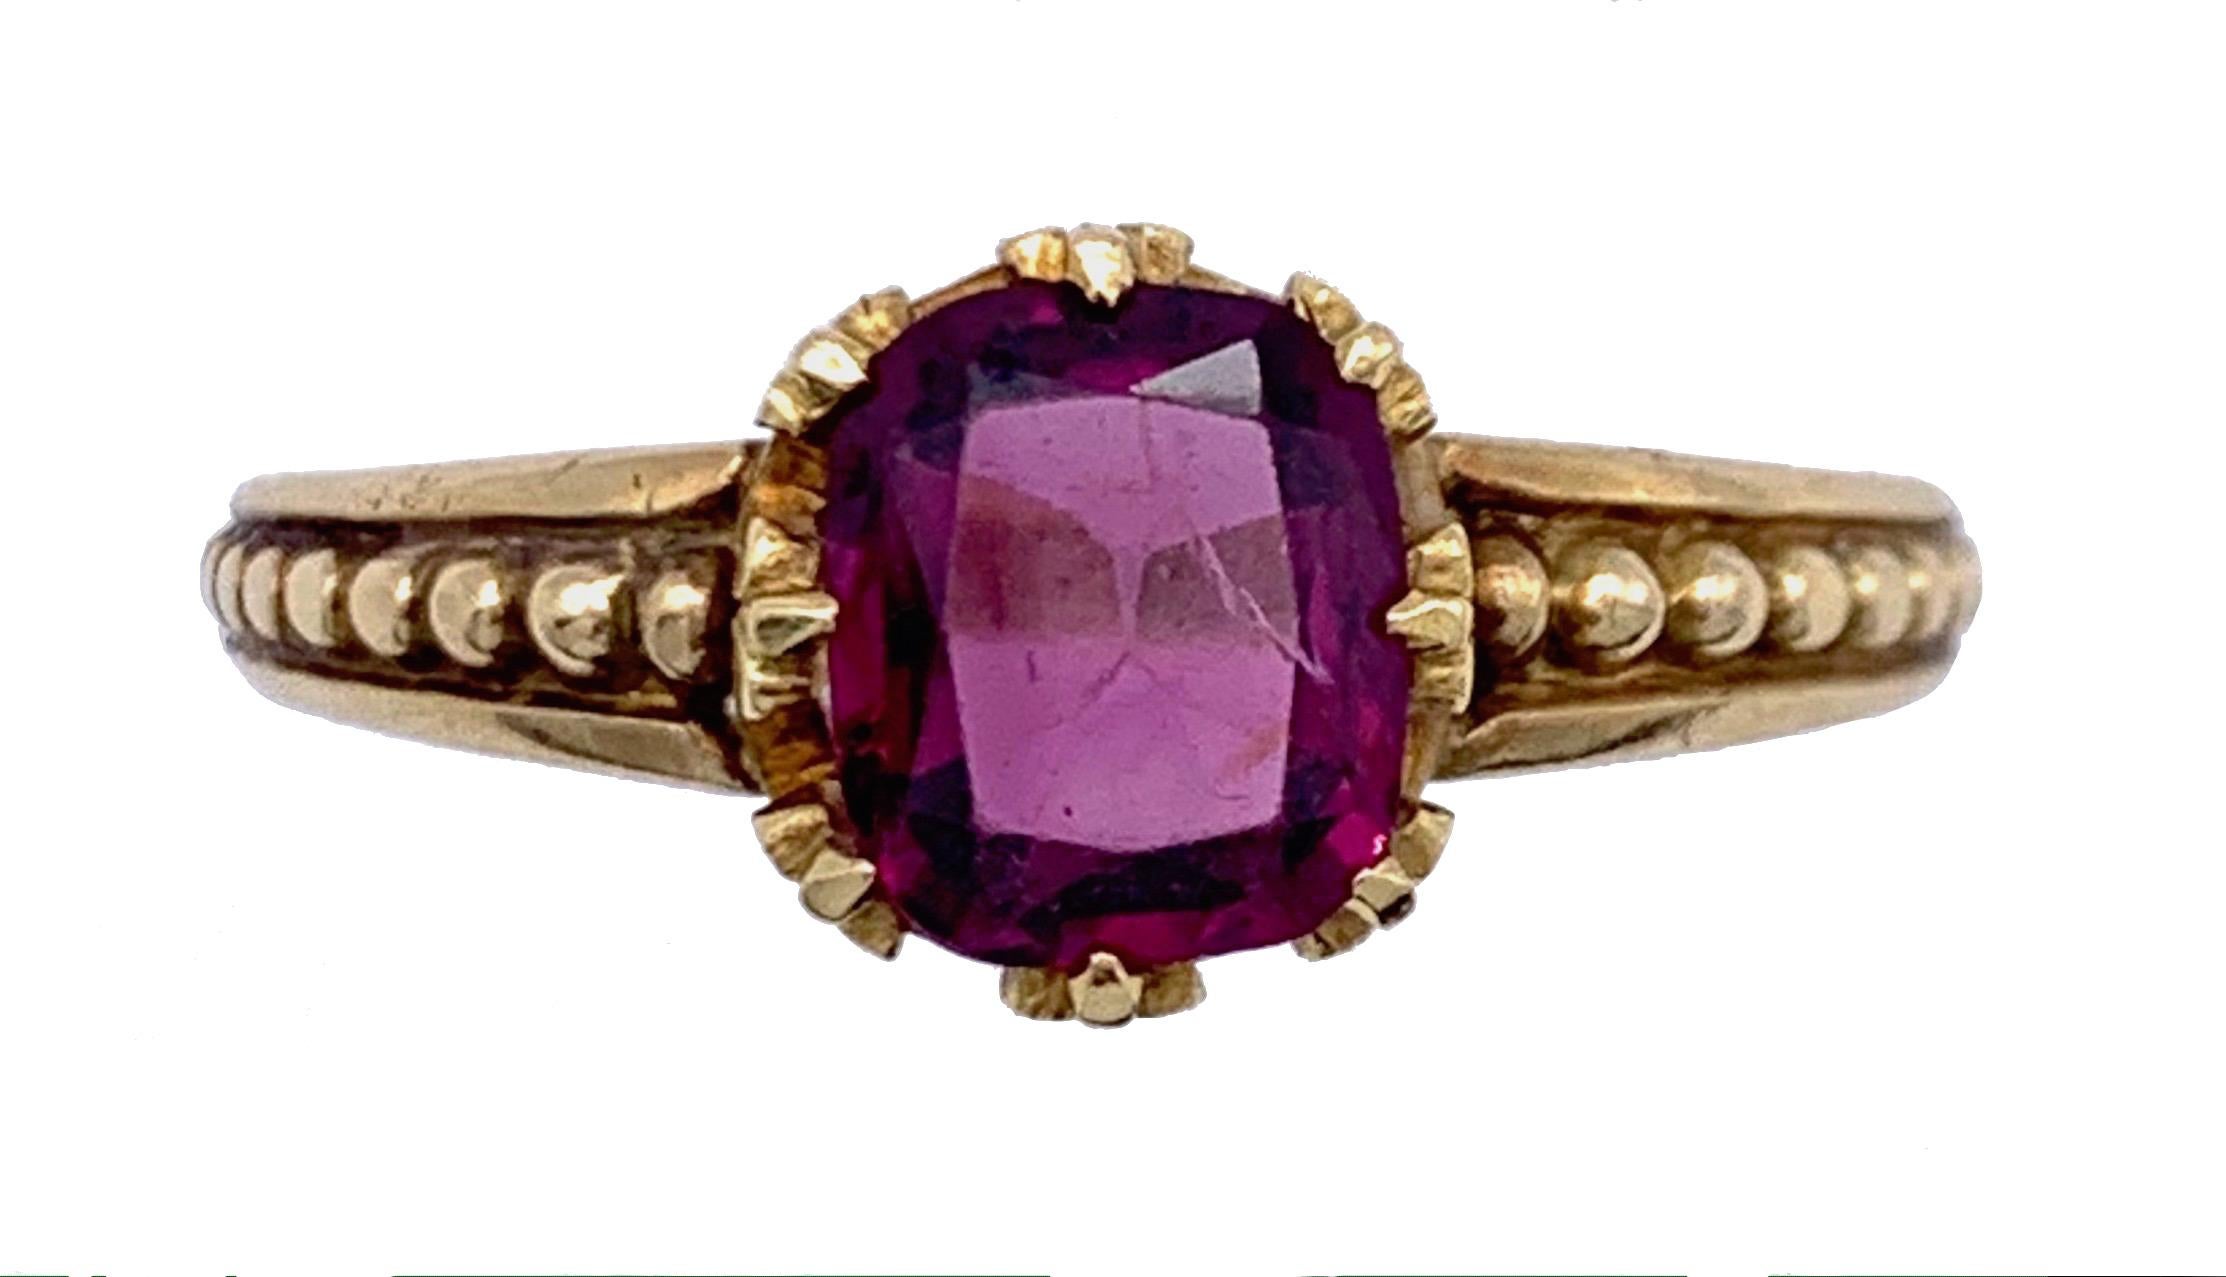 Elegant almandin garnet ring in a fine claw setting. The ring shank is decorated with balls, as the shank distances itself from the centre stone the balls decrease in size. Thevgarnet has an inmtensive deep pinkish violet hue.
The garnet in it's